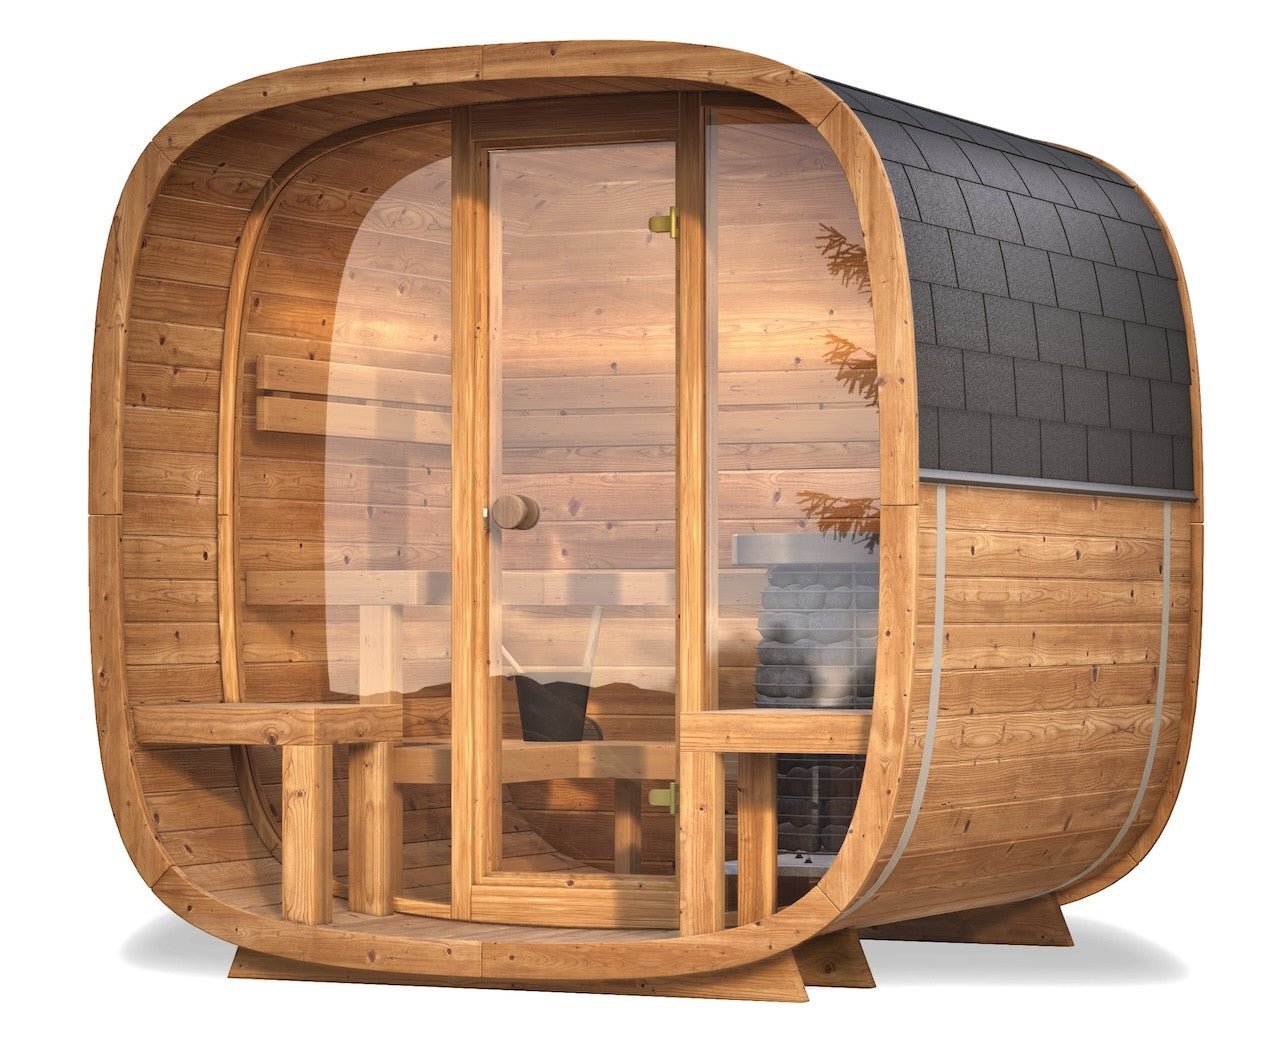 Saunasell Dice Comfy 4 to 5 Person Outdoor Sauna - Heracles Wellness